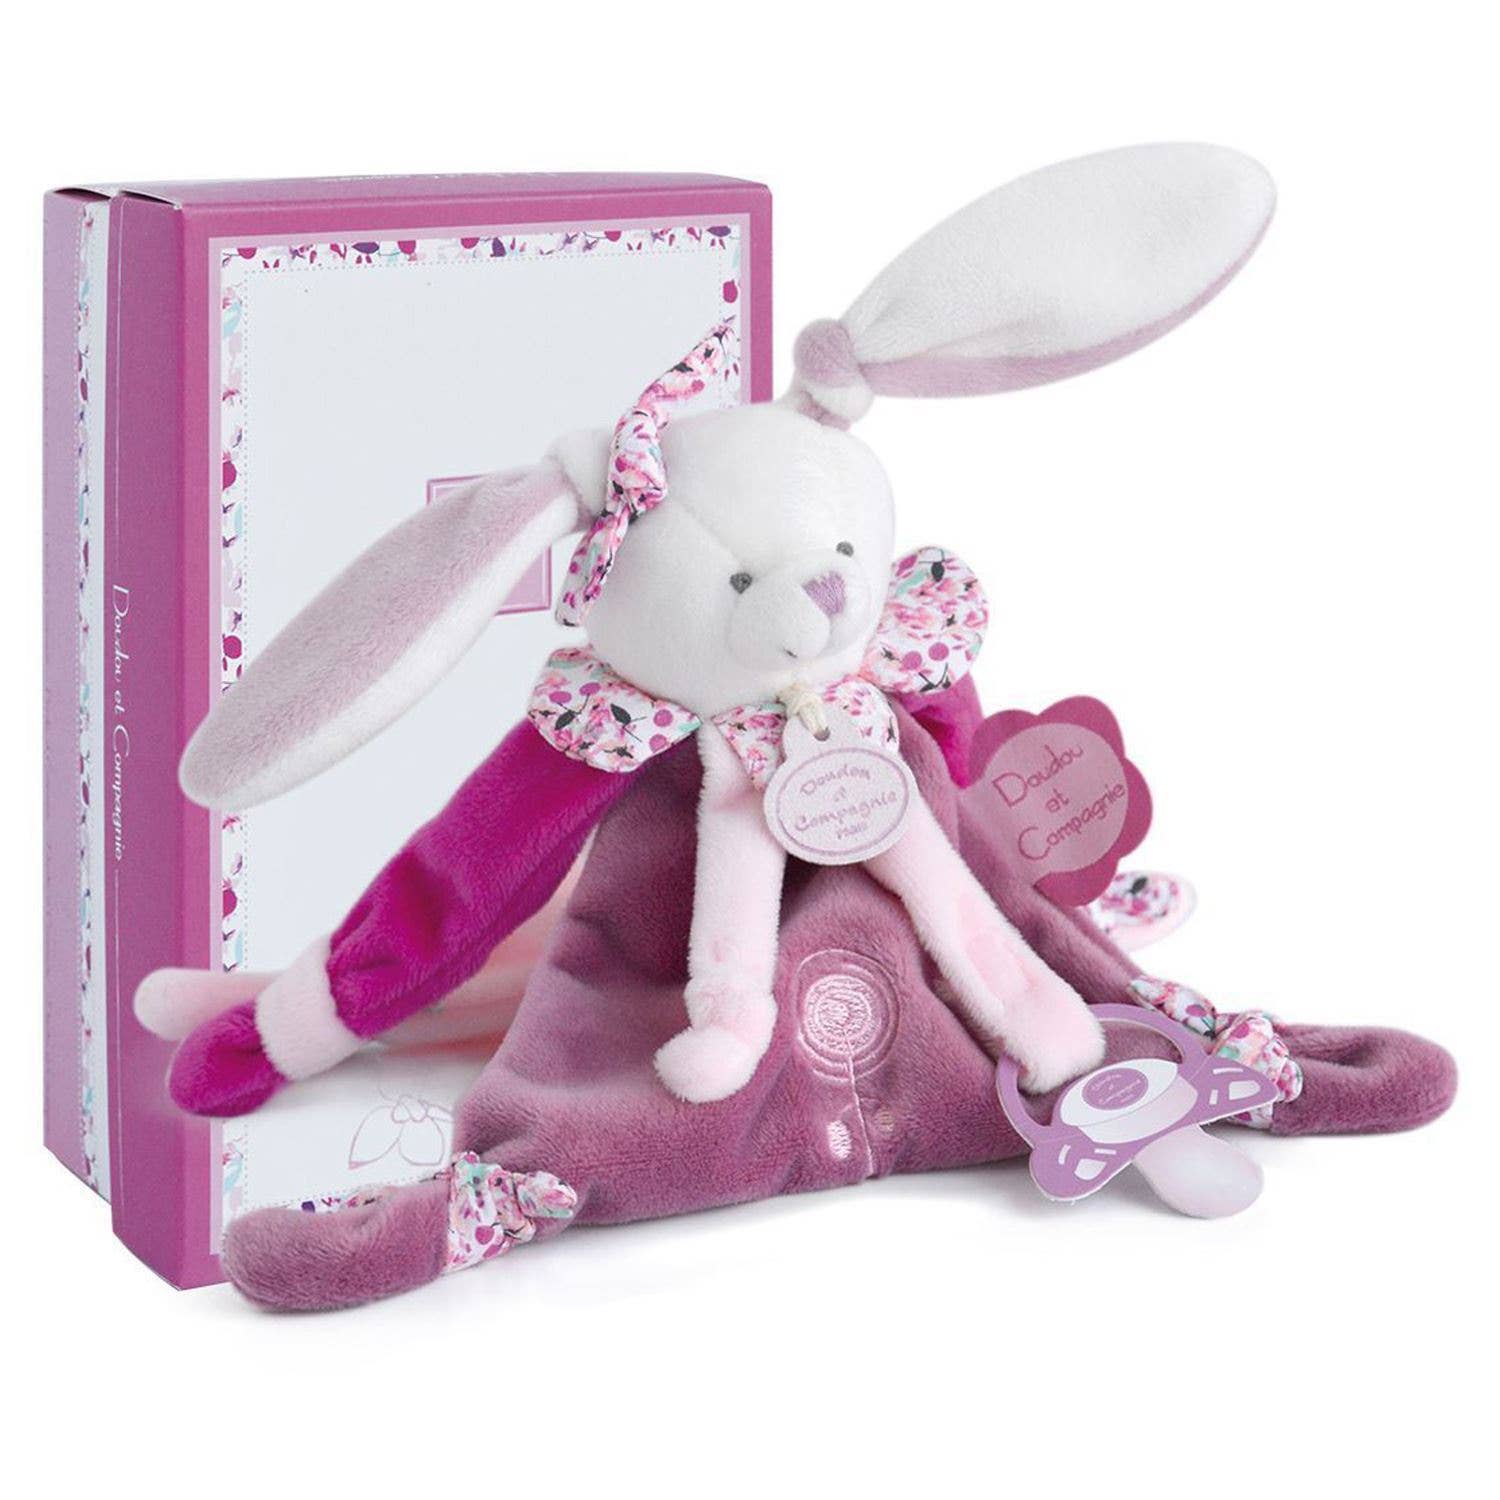 Cherry the Bunny pacifier holder in magenta dress with gift box